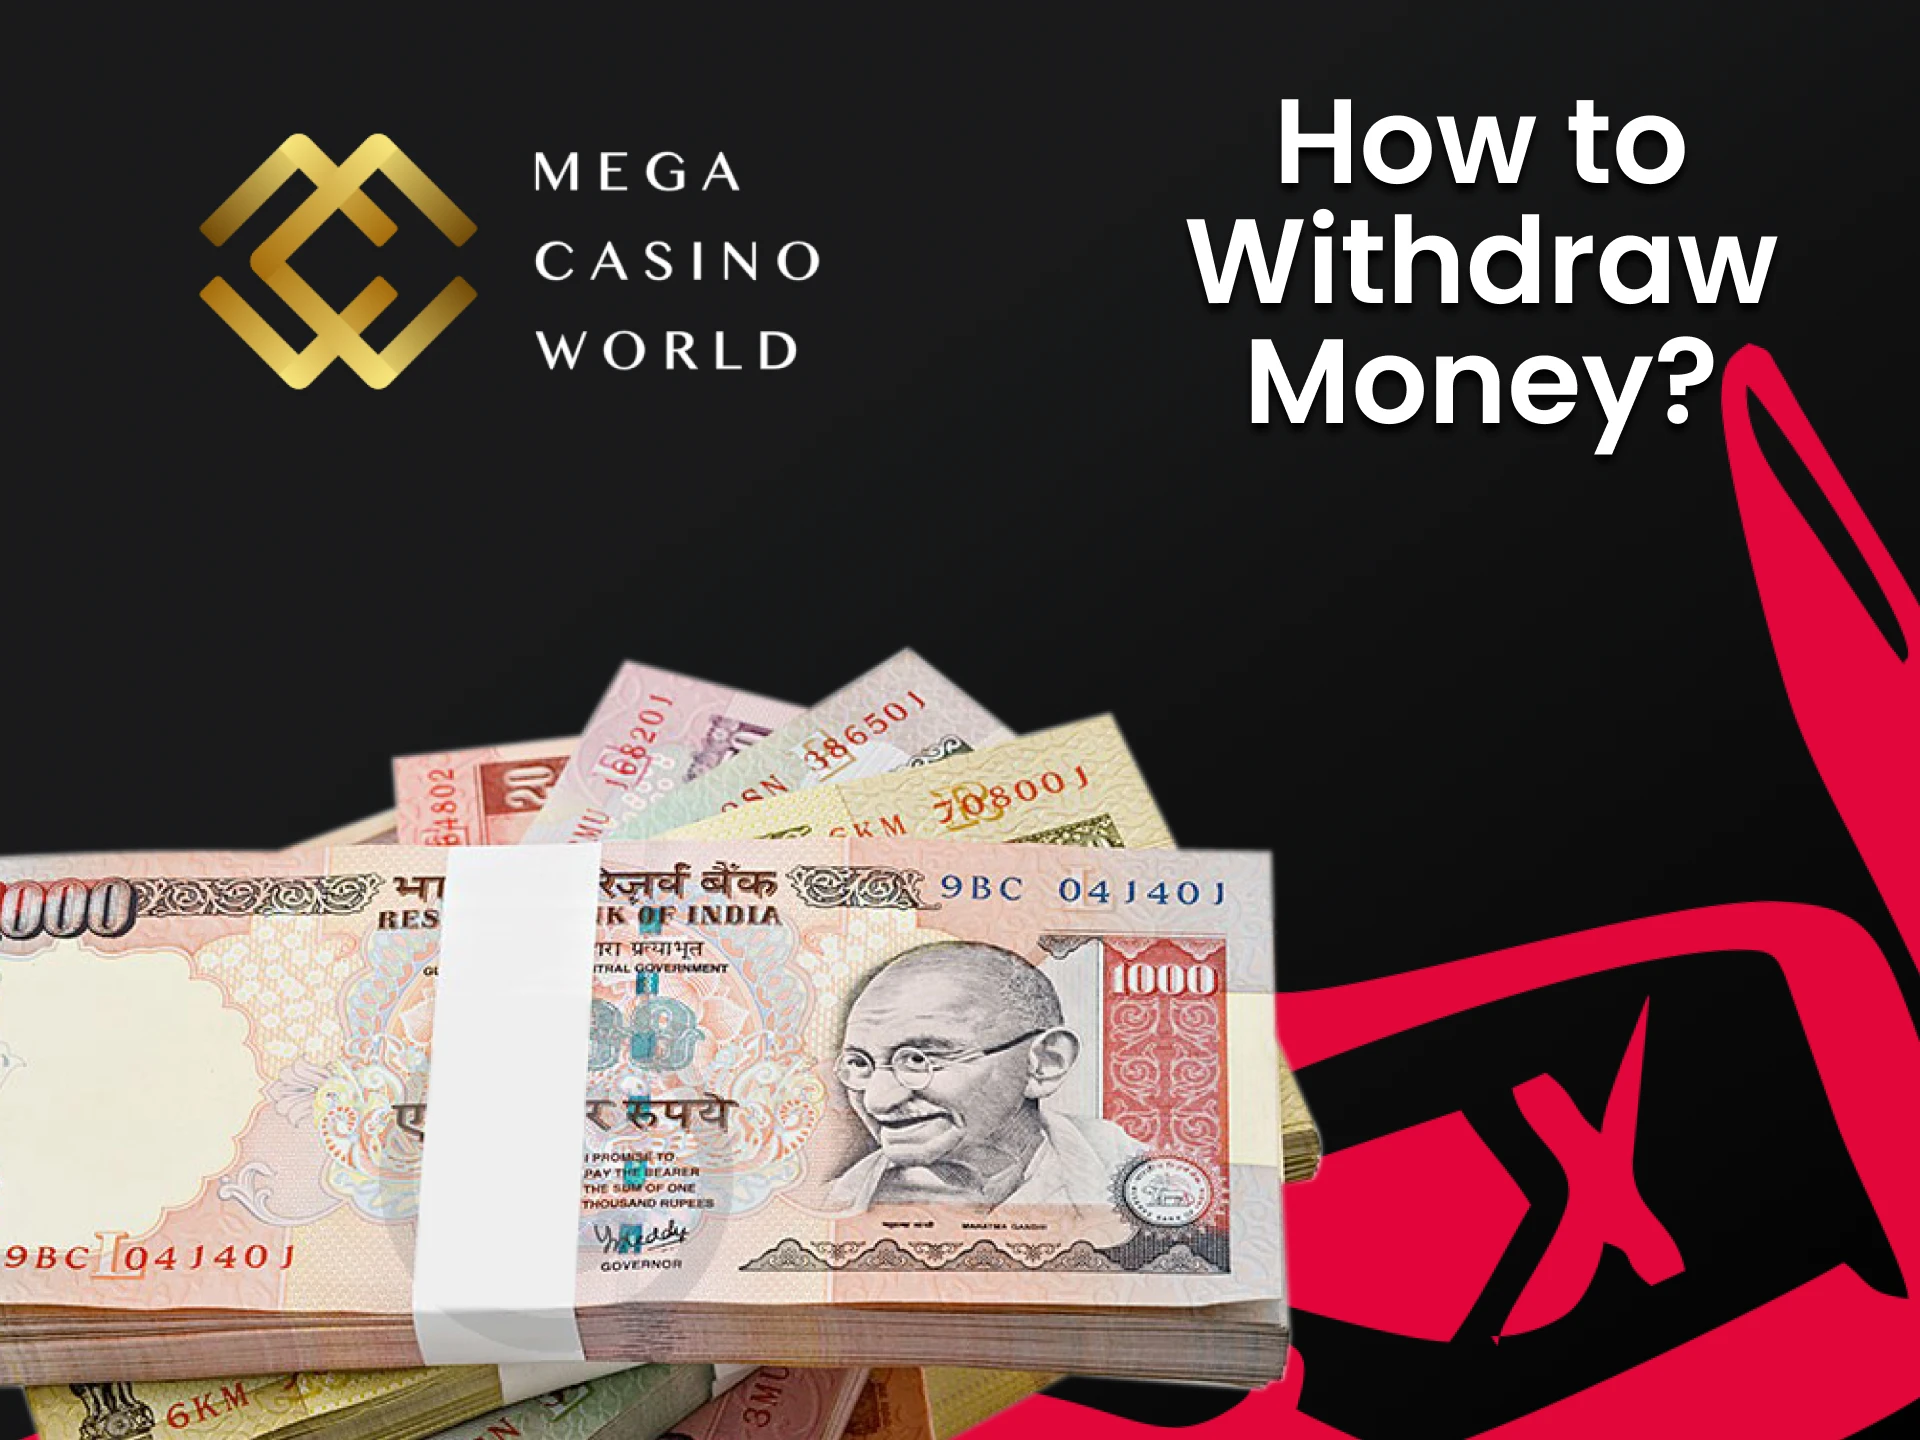 We will tell you how to withdraw funds from the MCW casino for the Aviator game.